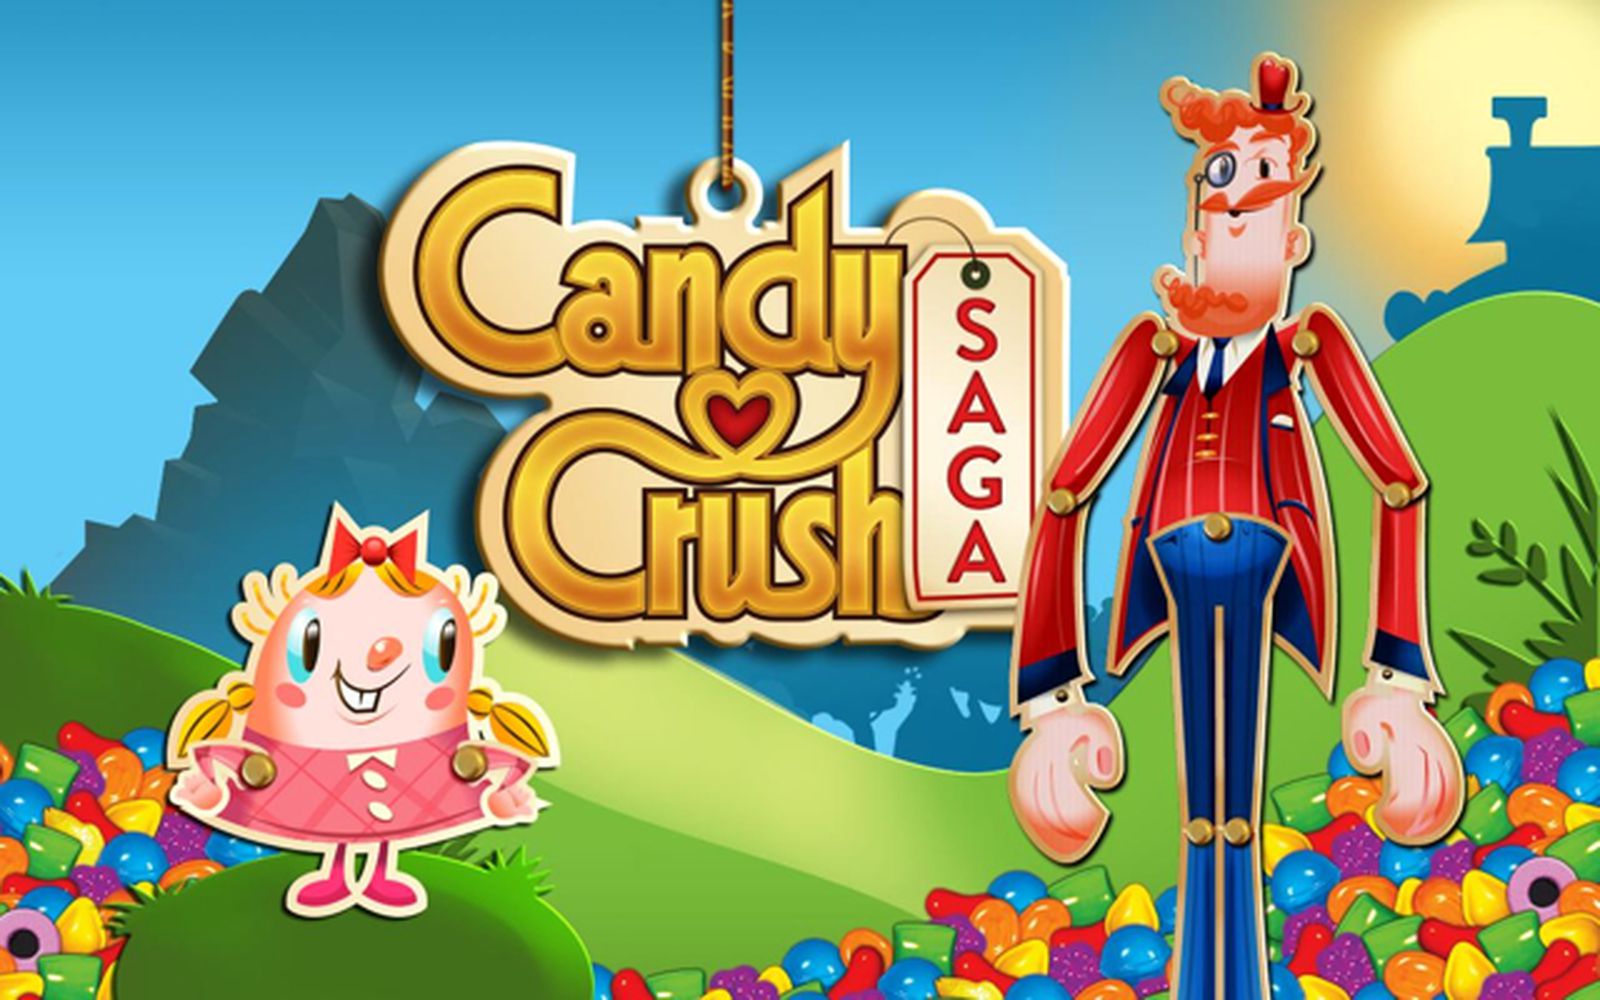 Preview: 'Candy Crush' maker King to go public